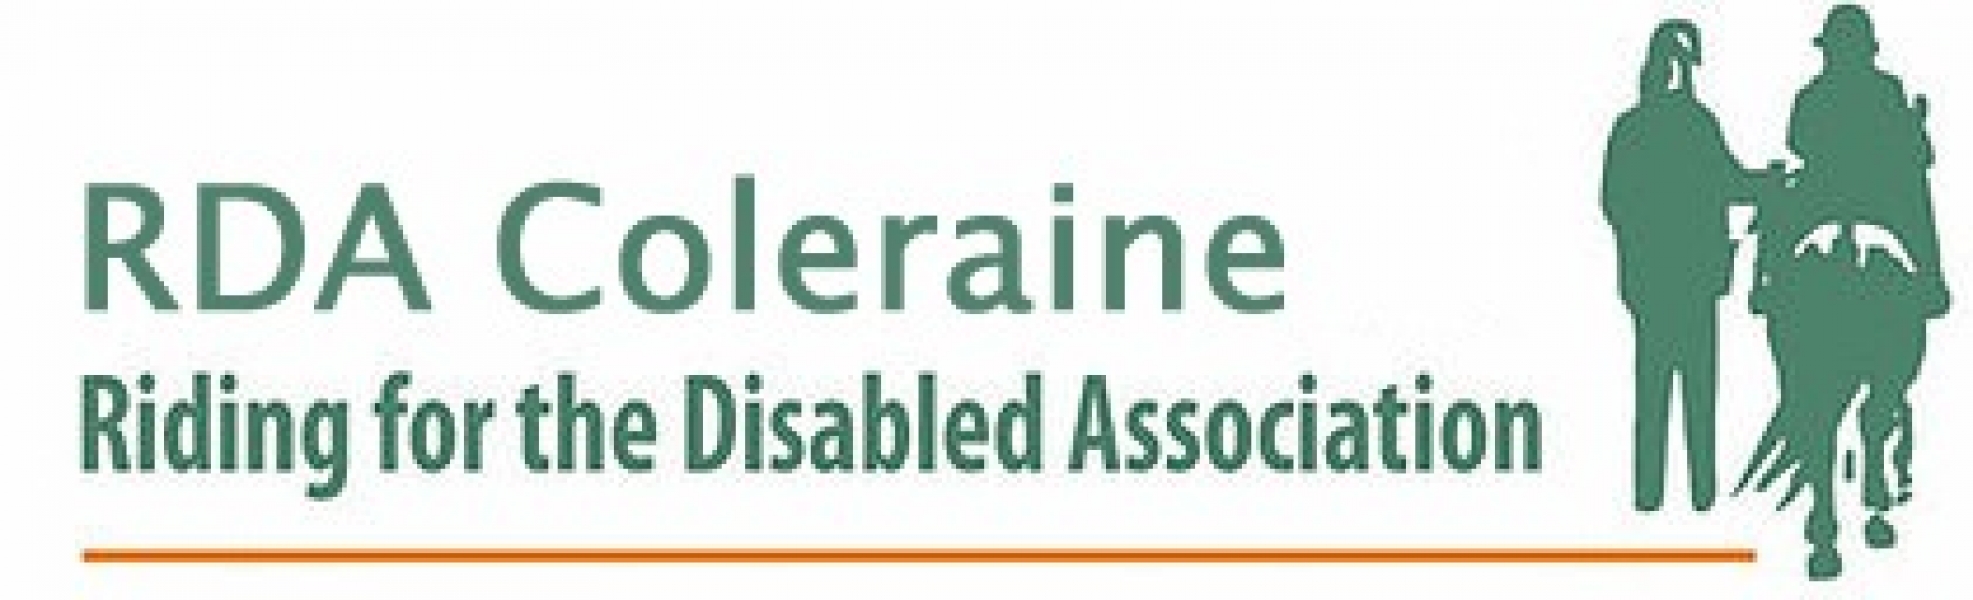 Riding for the Disabled Association - Coleraine Group eCards